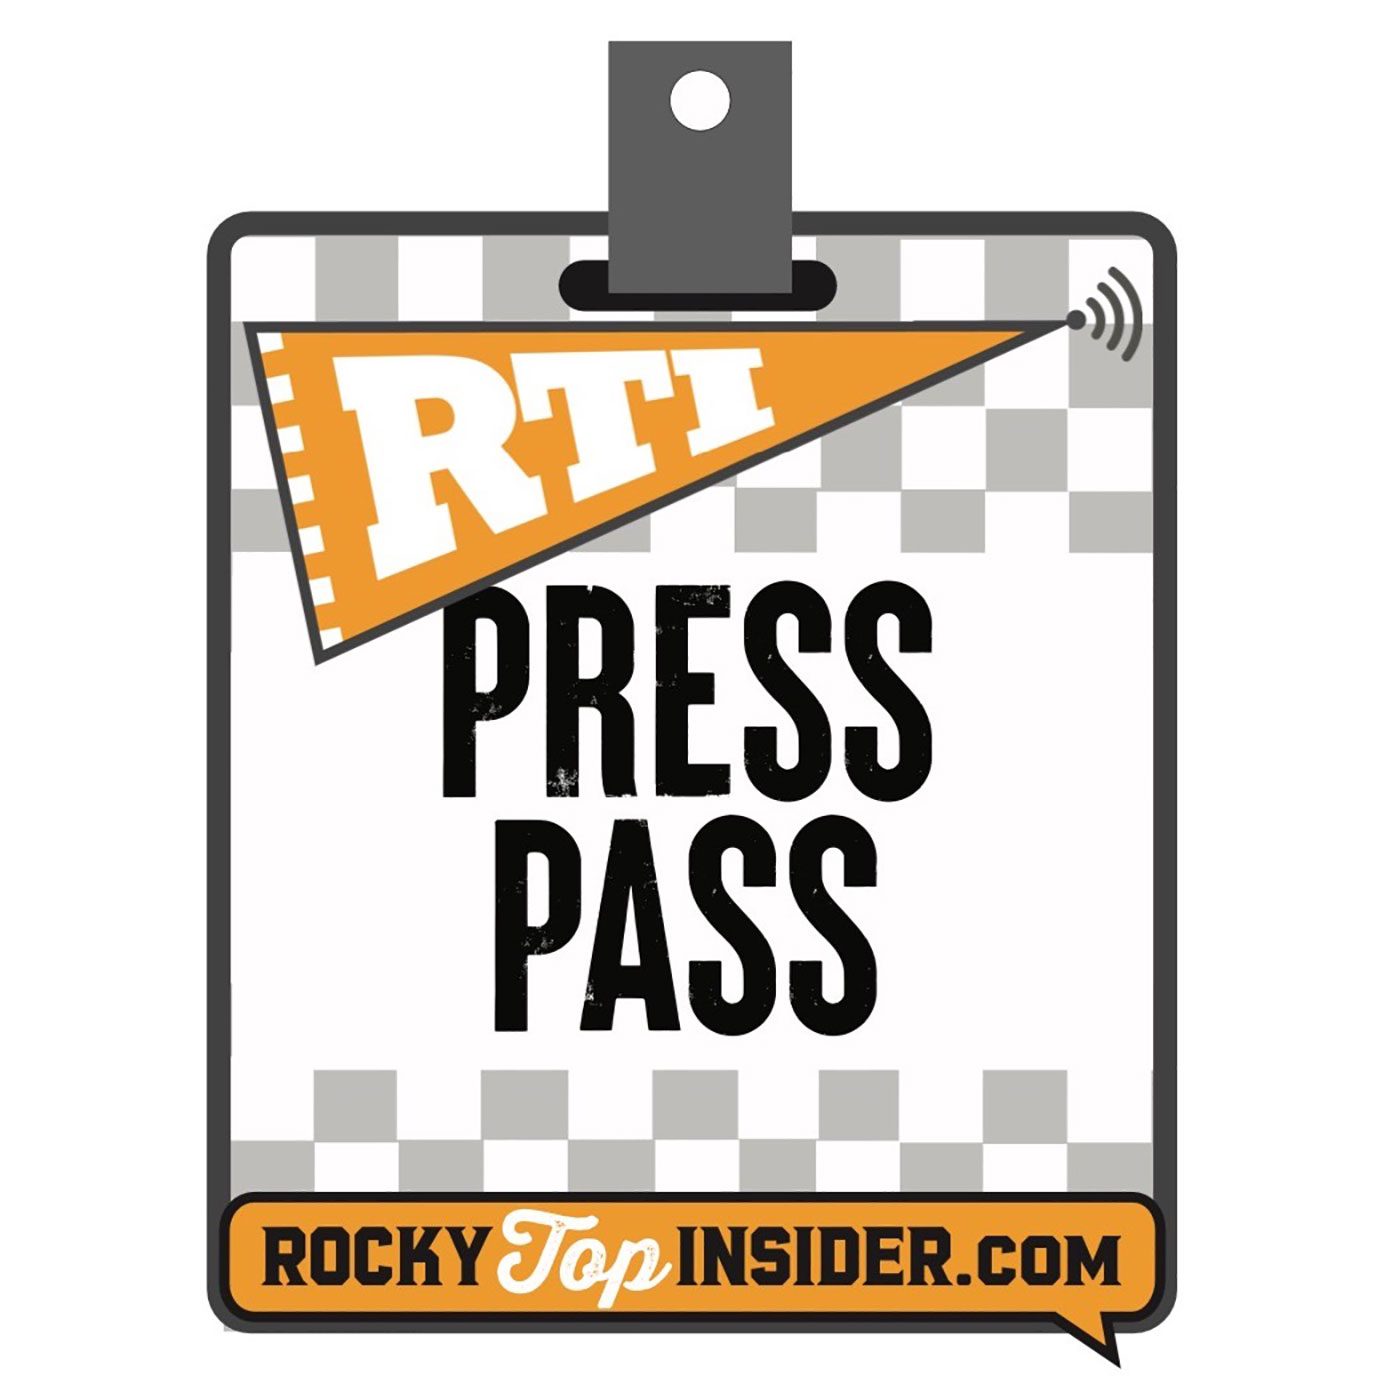 Rocky Top Insider: The RTI Press Pass with Trey Wallace